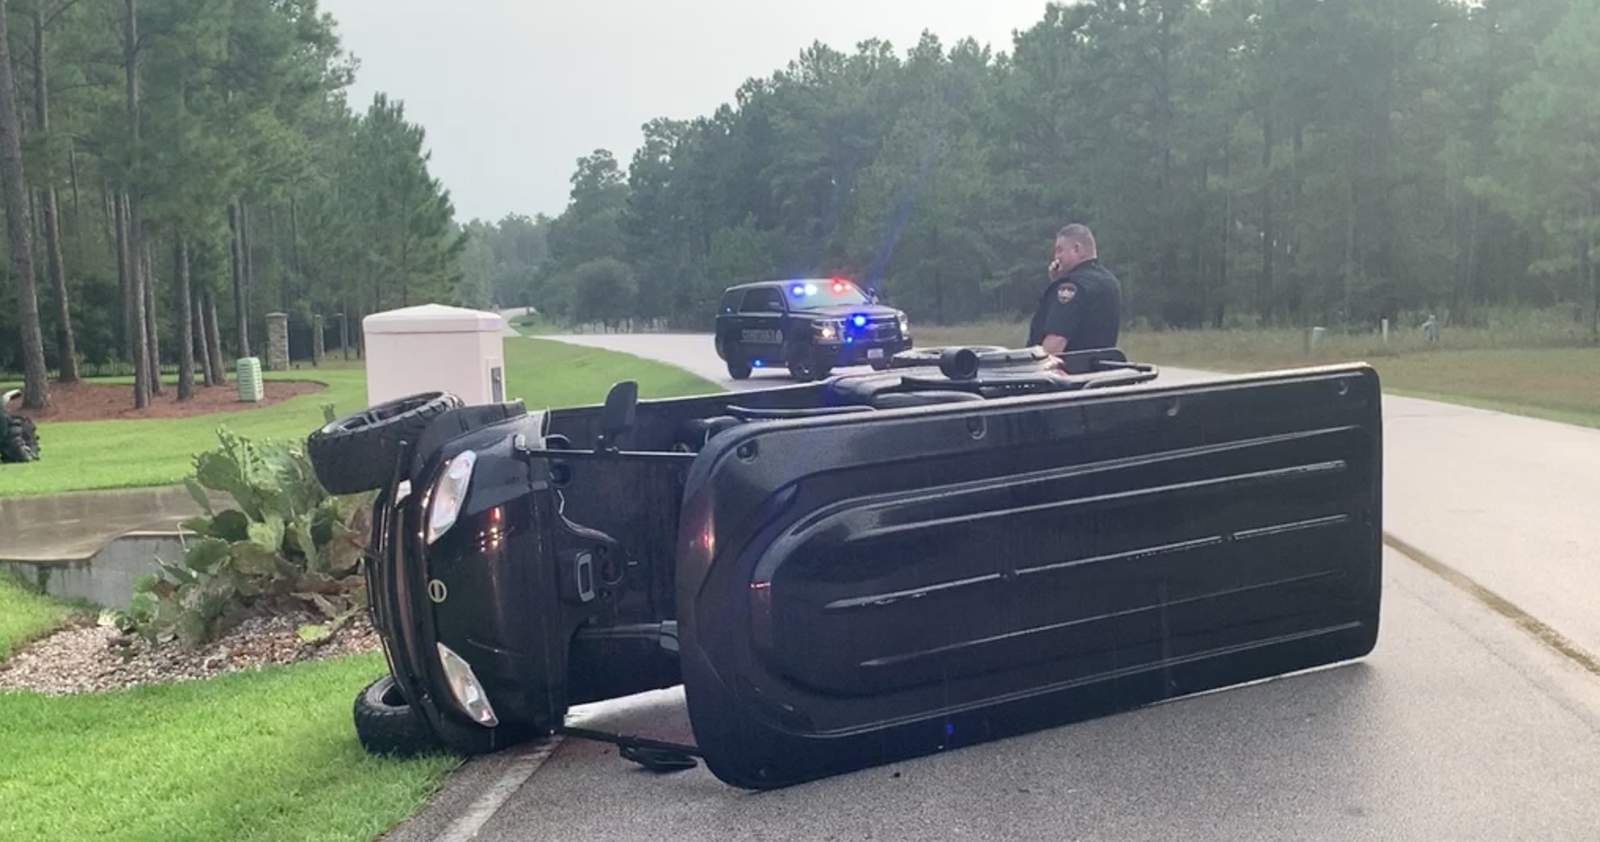 11-year-old child dies after golf cart crash in Magnolia, officials say